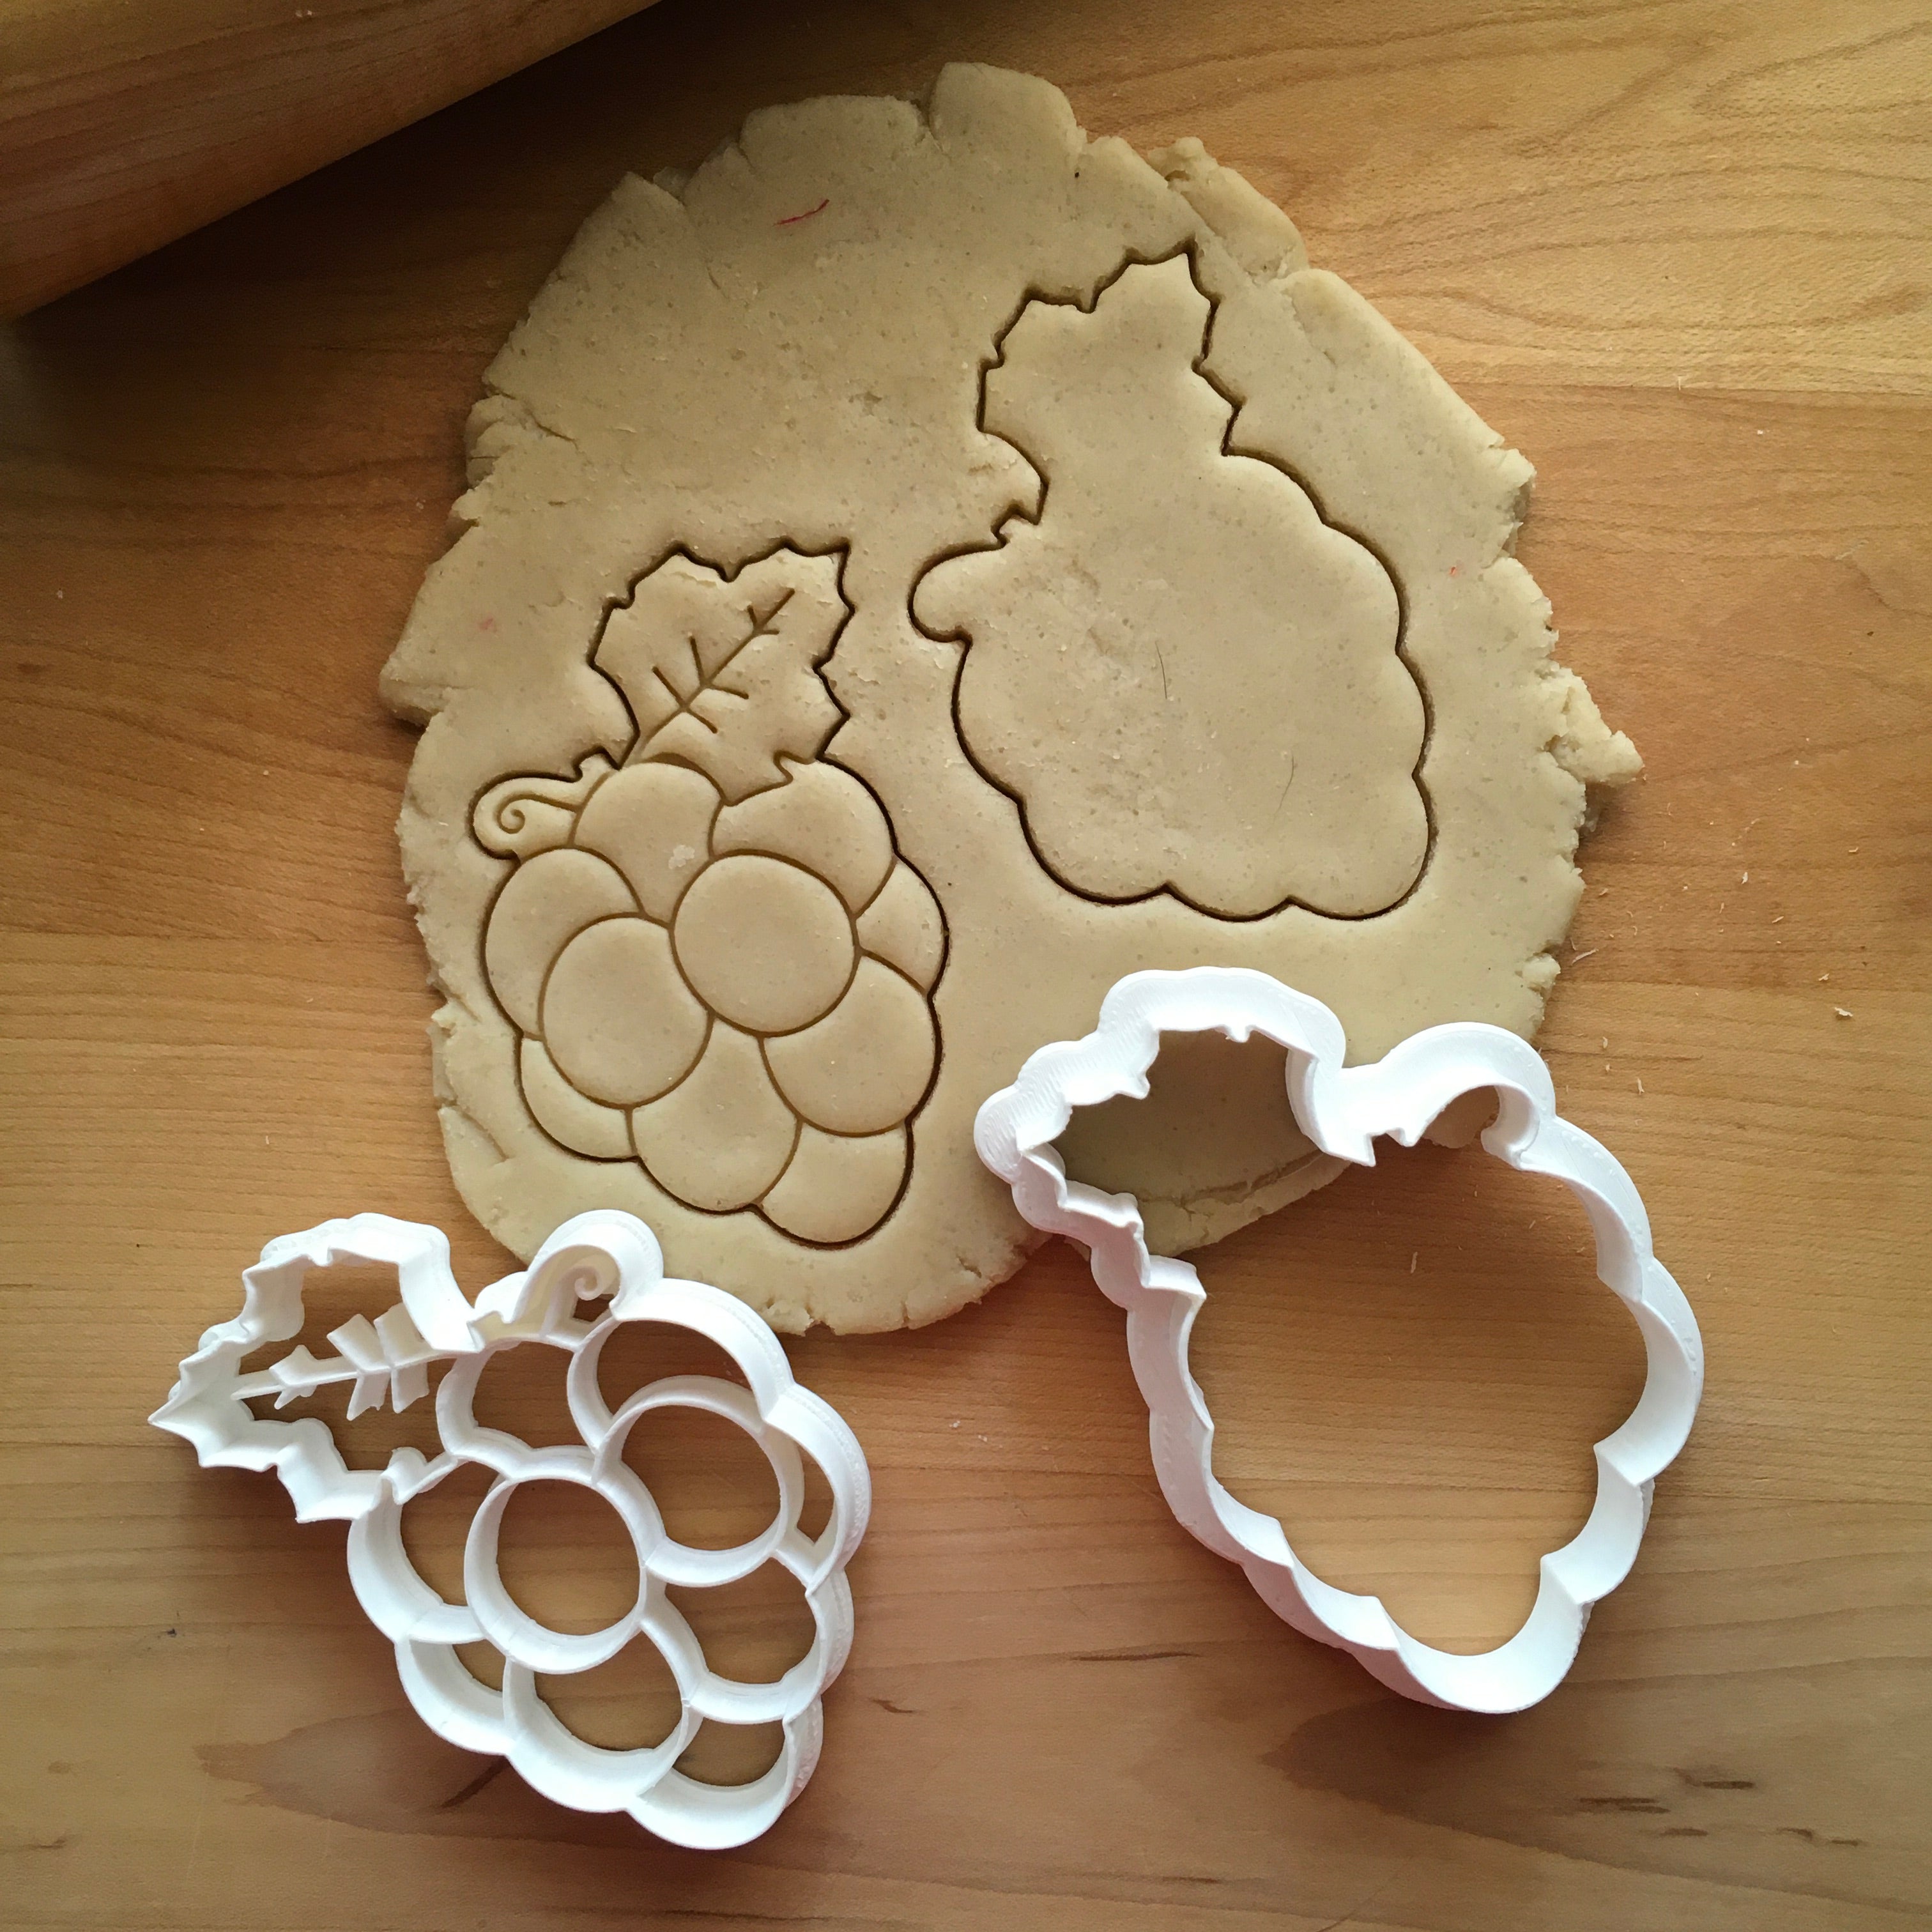 Set of 2 Grapes Cookie Cutters/Dishwasher Safe